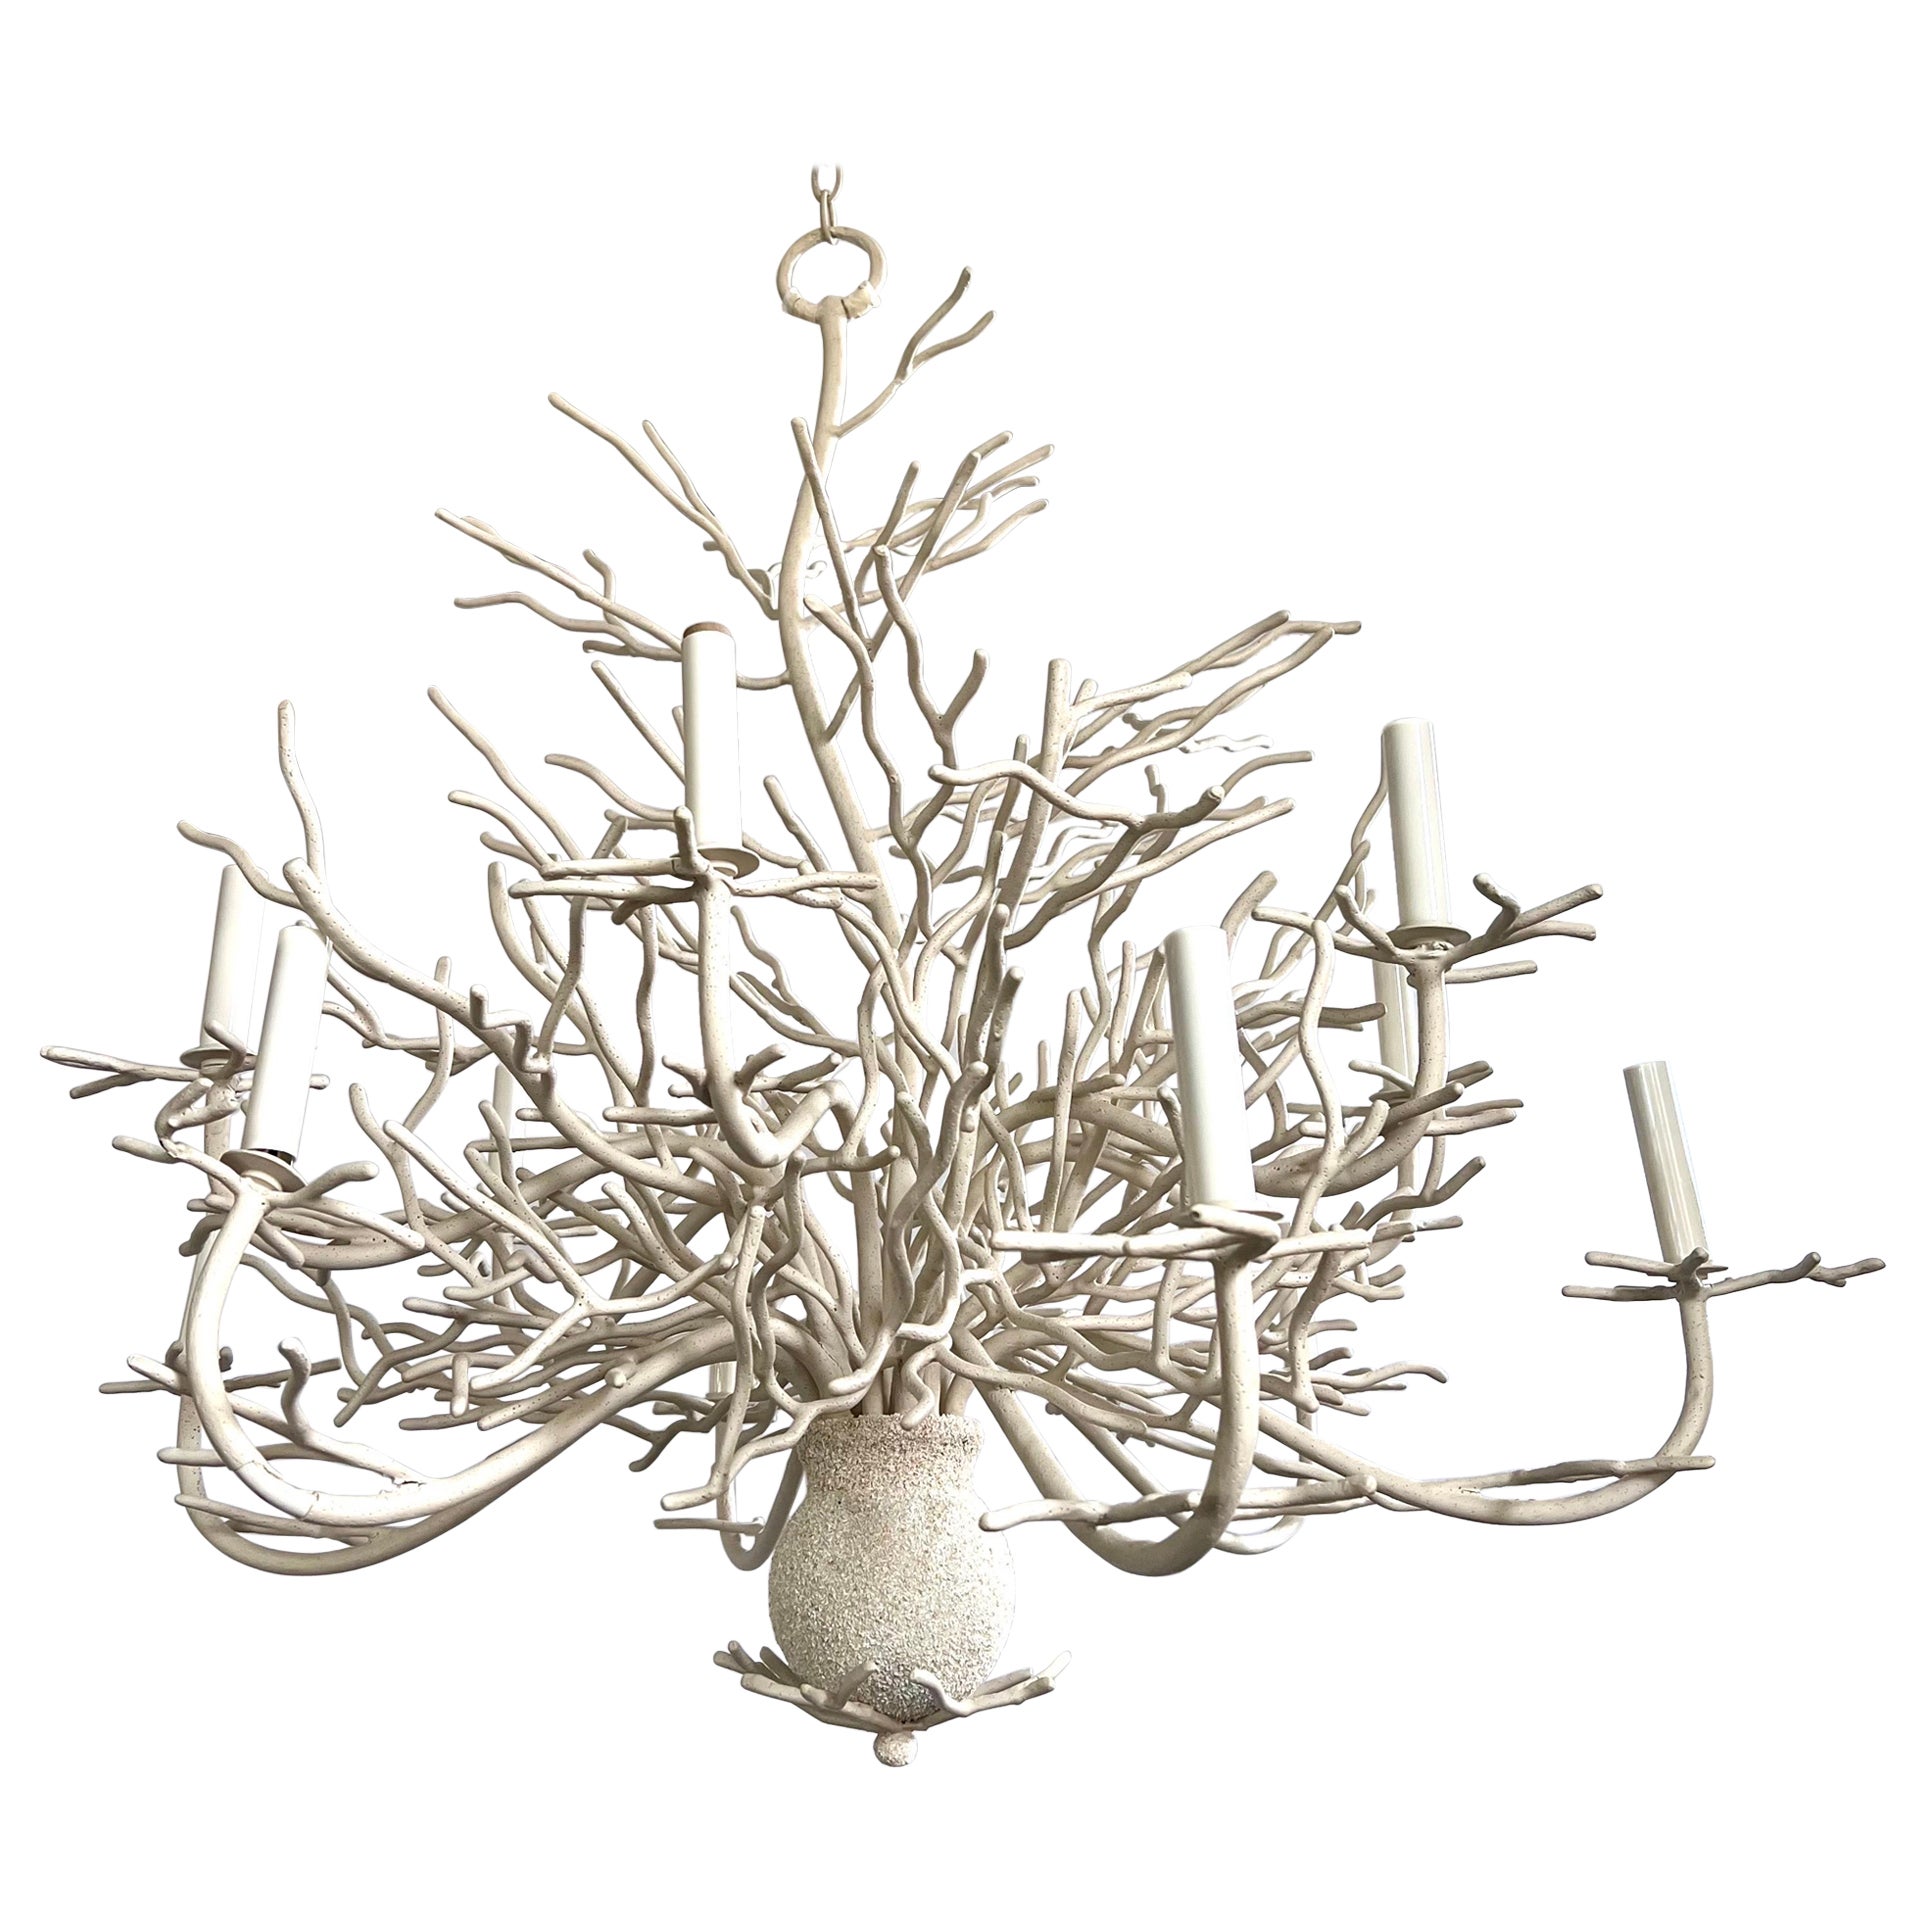 Organic Form Seaward White Coral 37" 12 Arm Large Chandelier